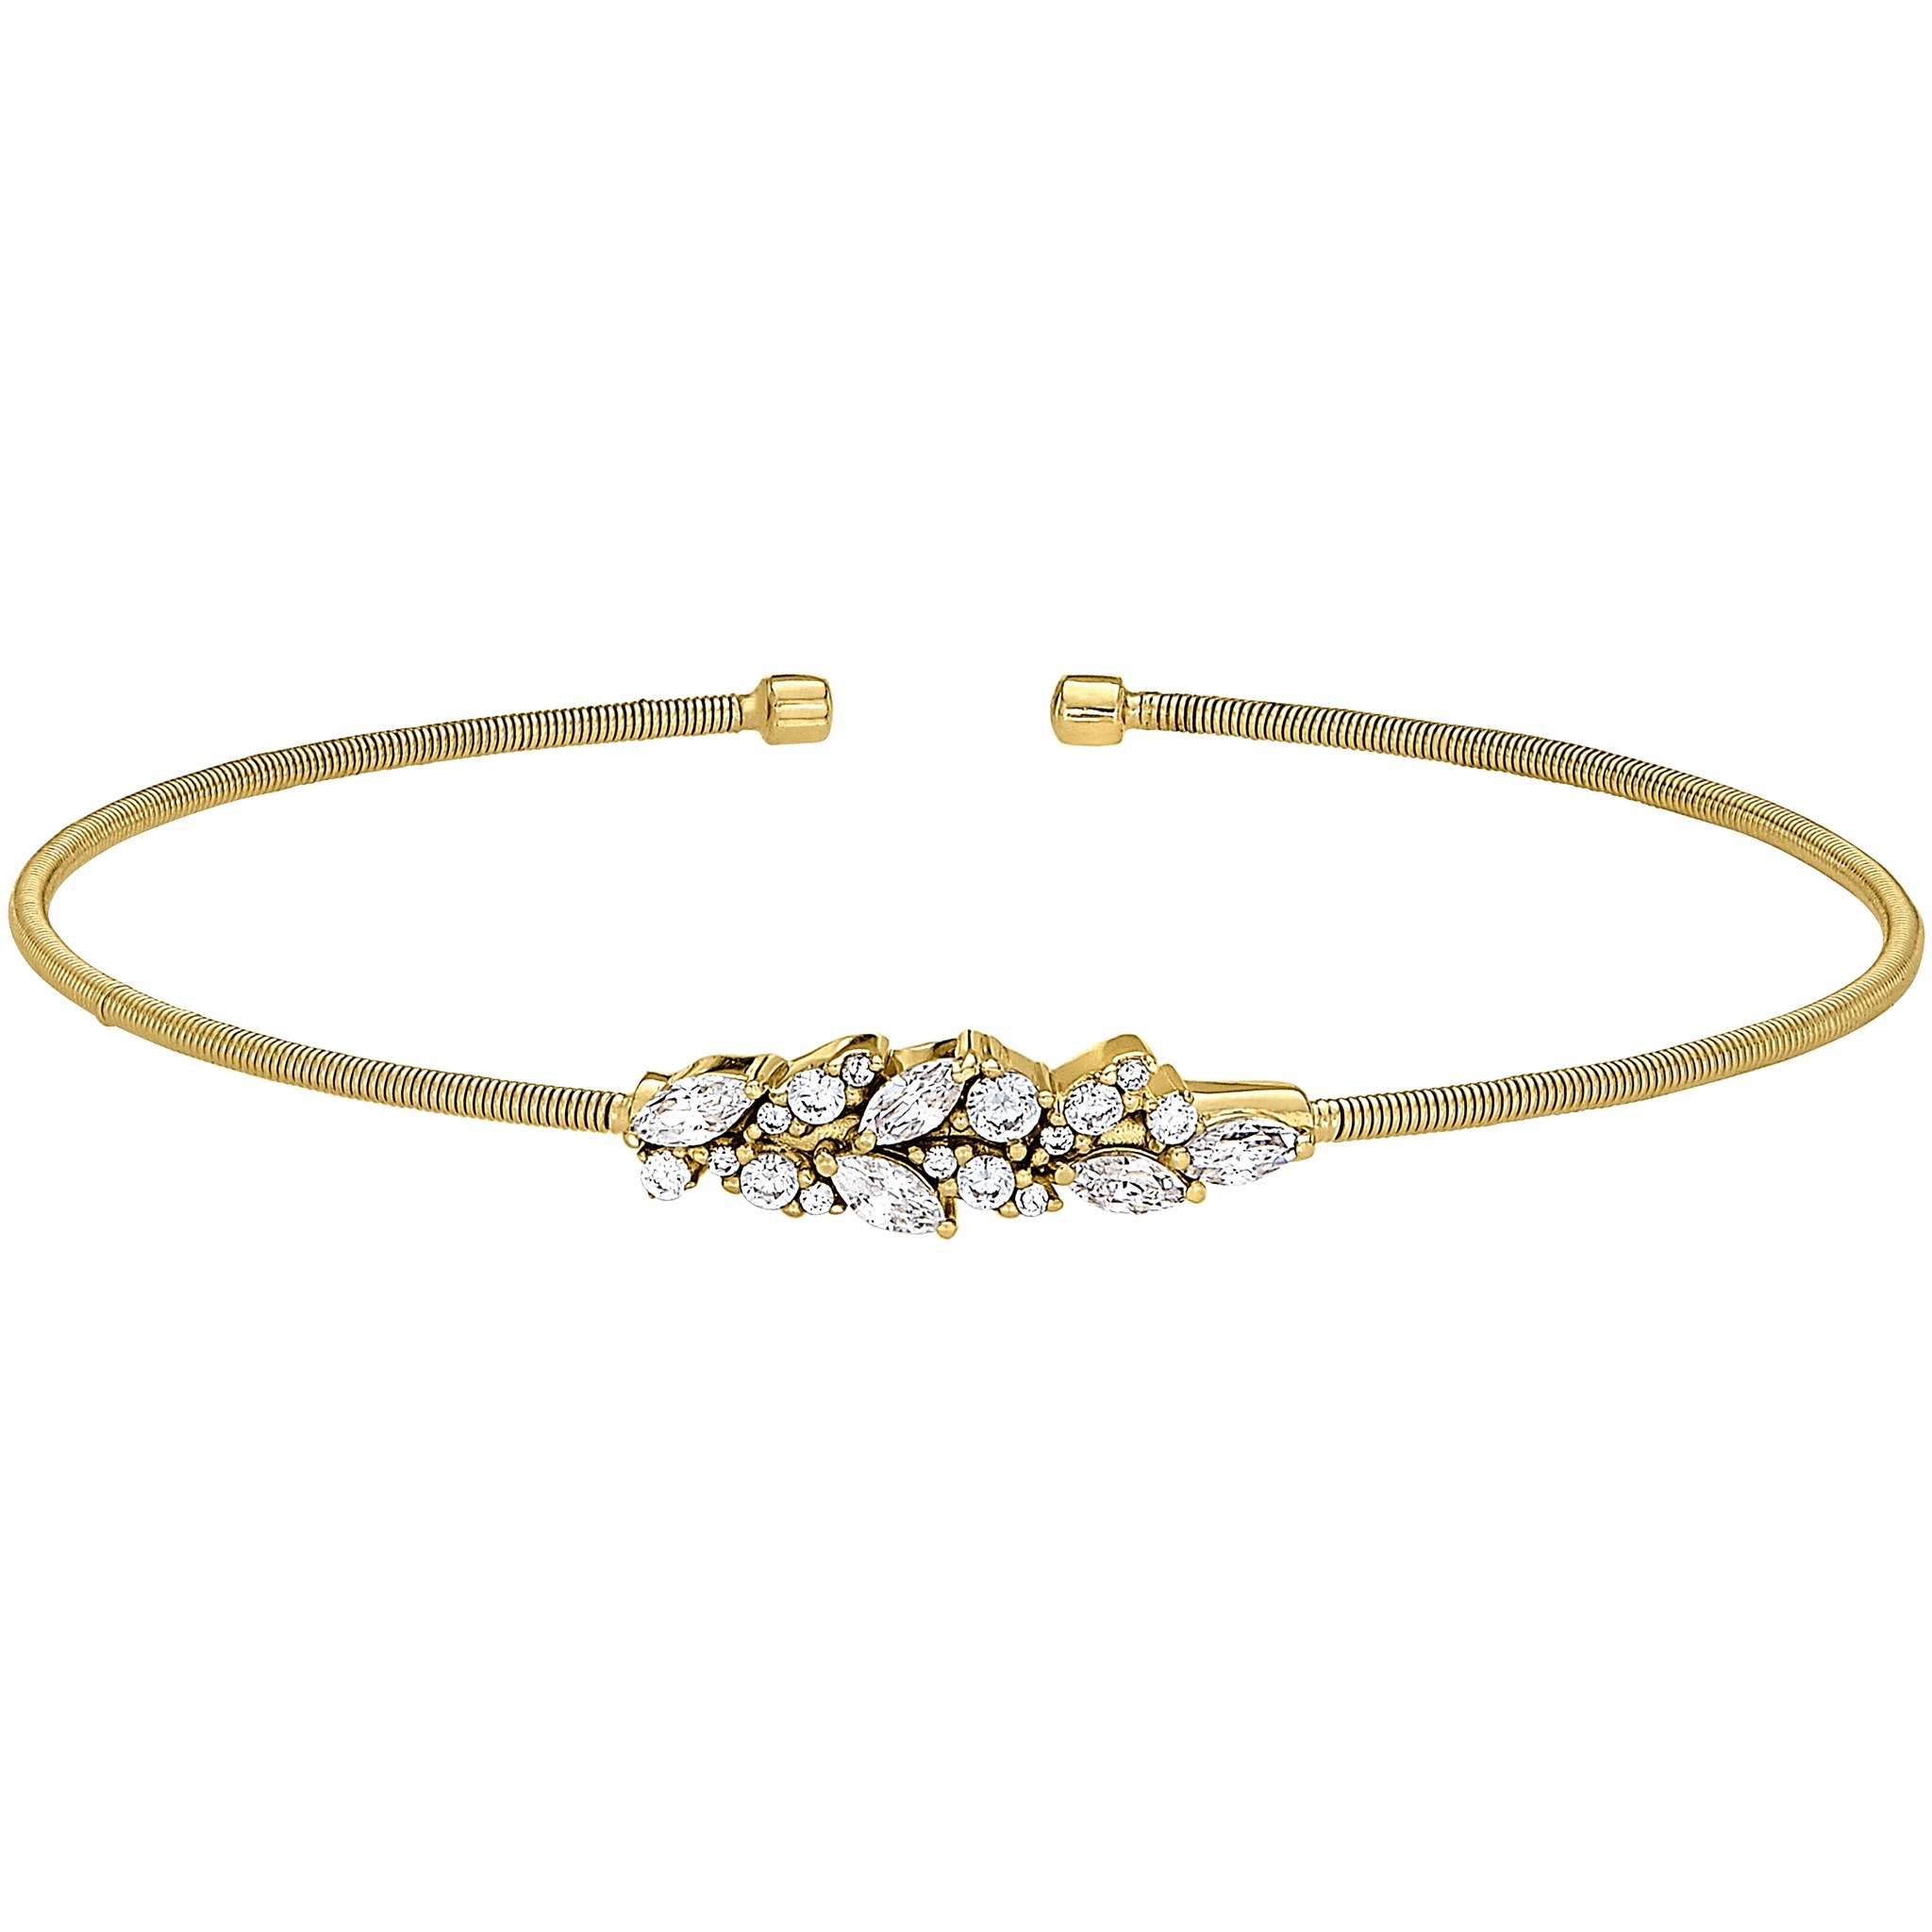 Gold Finish Sterling Silver Cable Cuff Bracelet w/Simulated Diamond Leaf Pattern